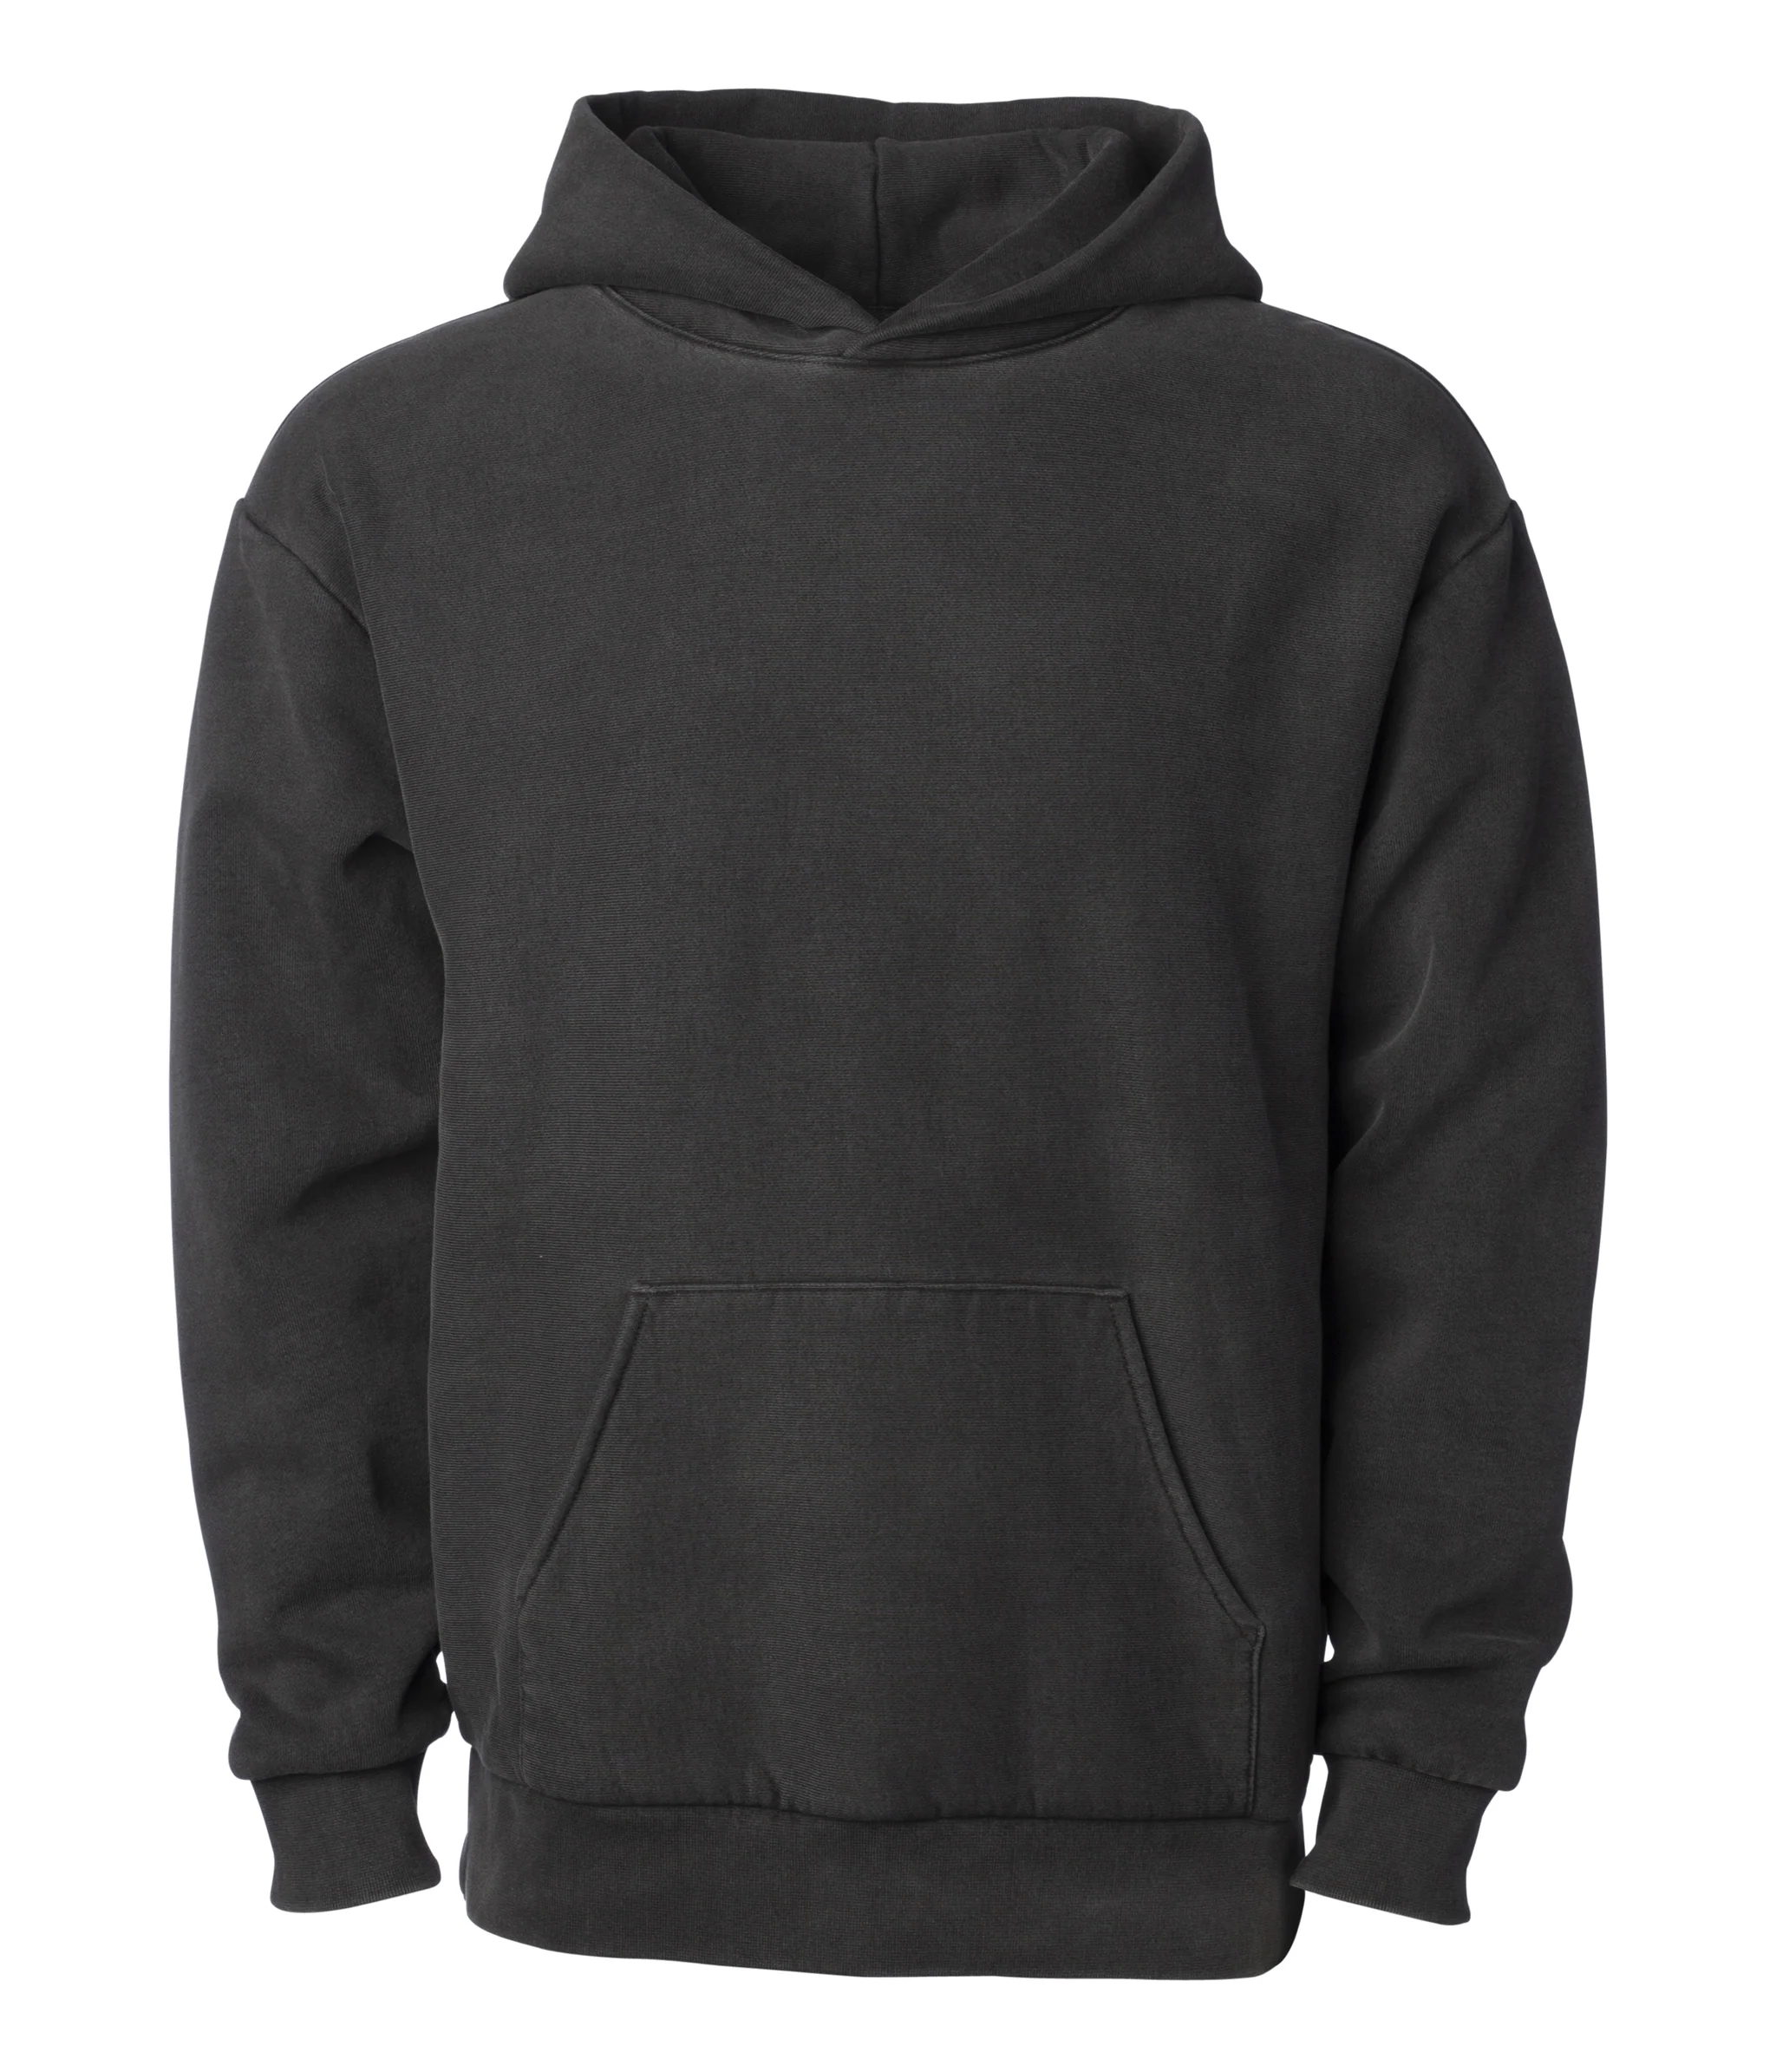 Plain gray hoodie with a front pocket isolated on a white background.